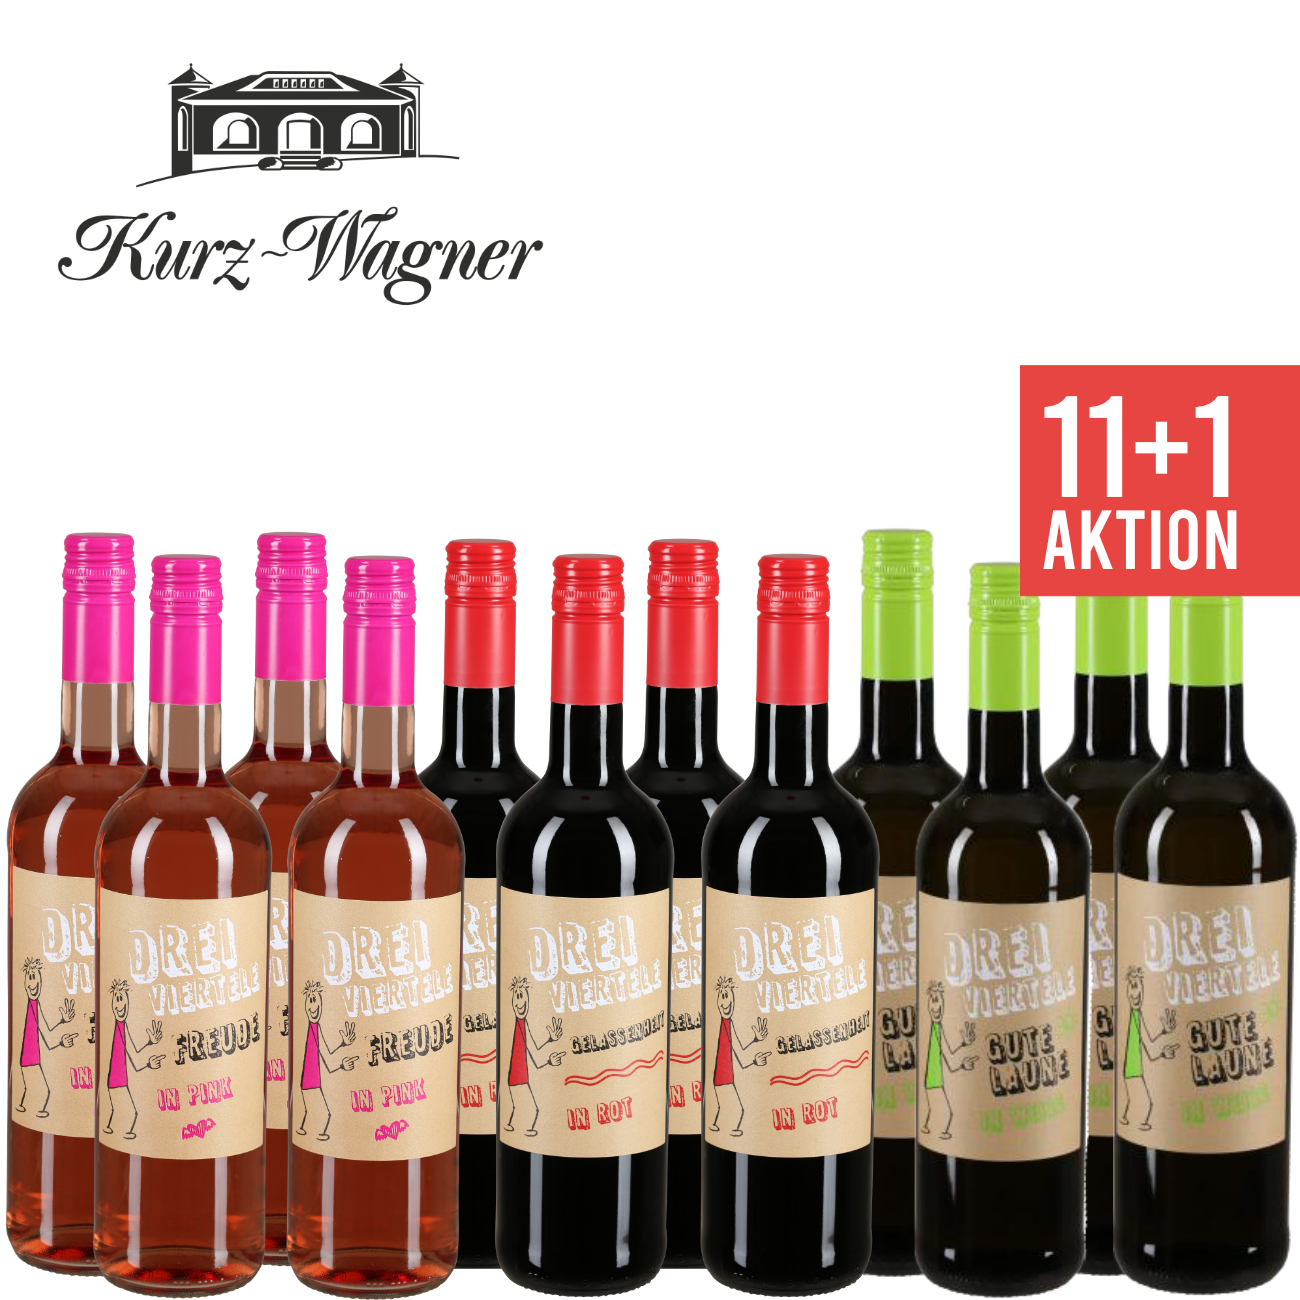 wein.plus The | members Find+Buy: wein.plus our Find+Buy wines of